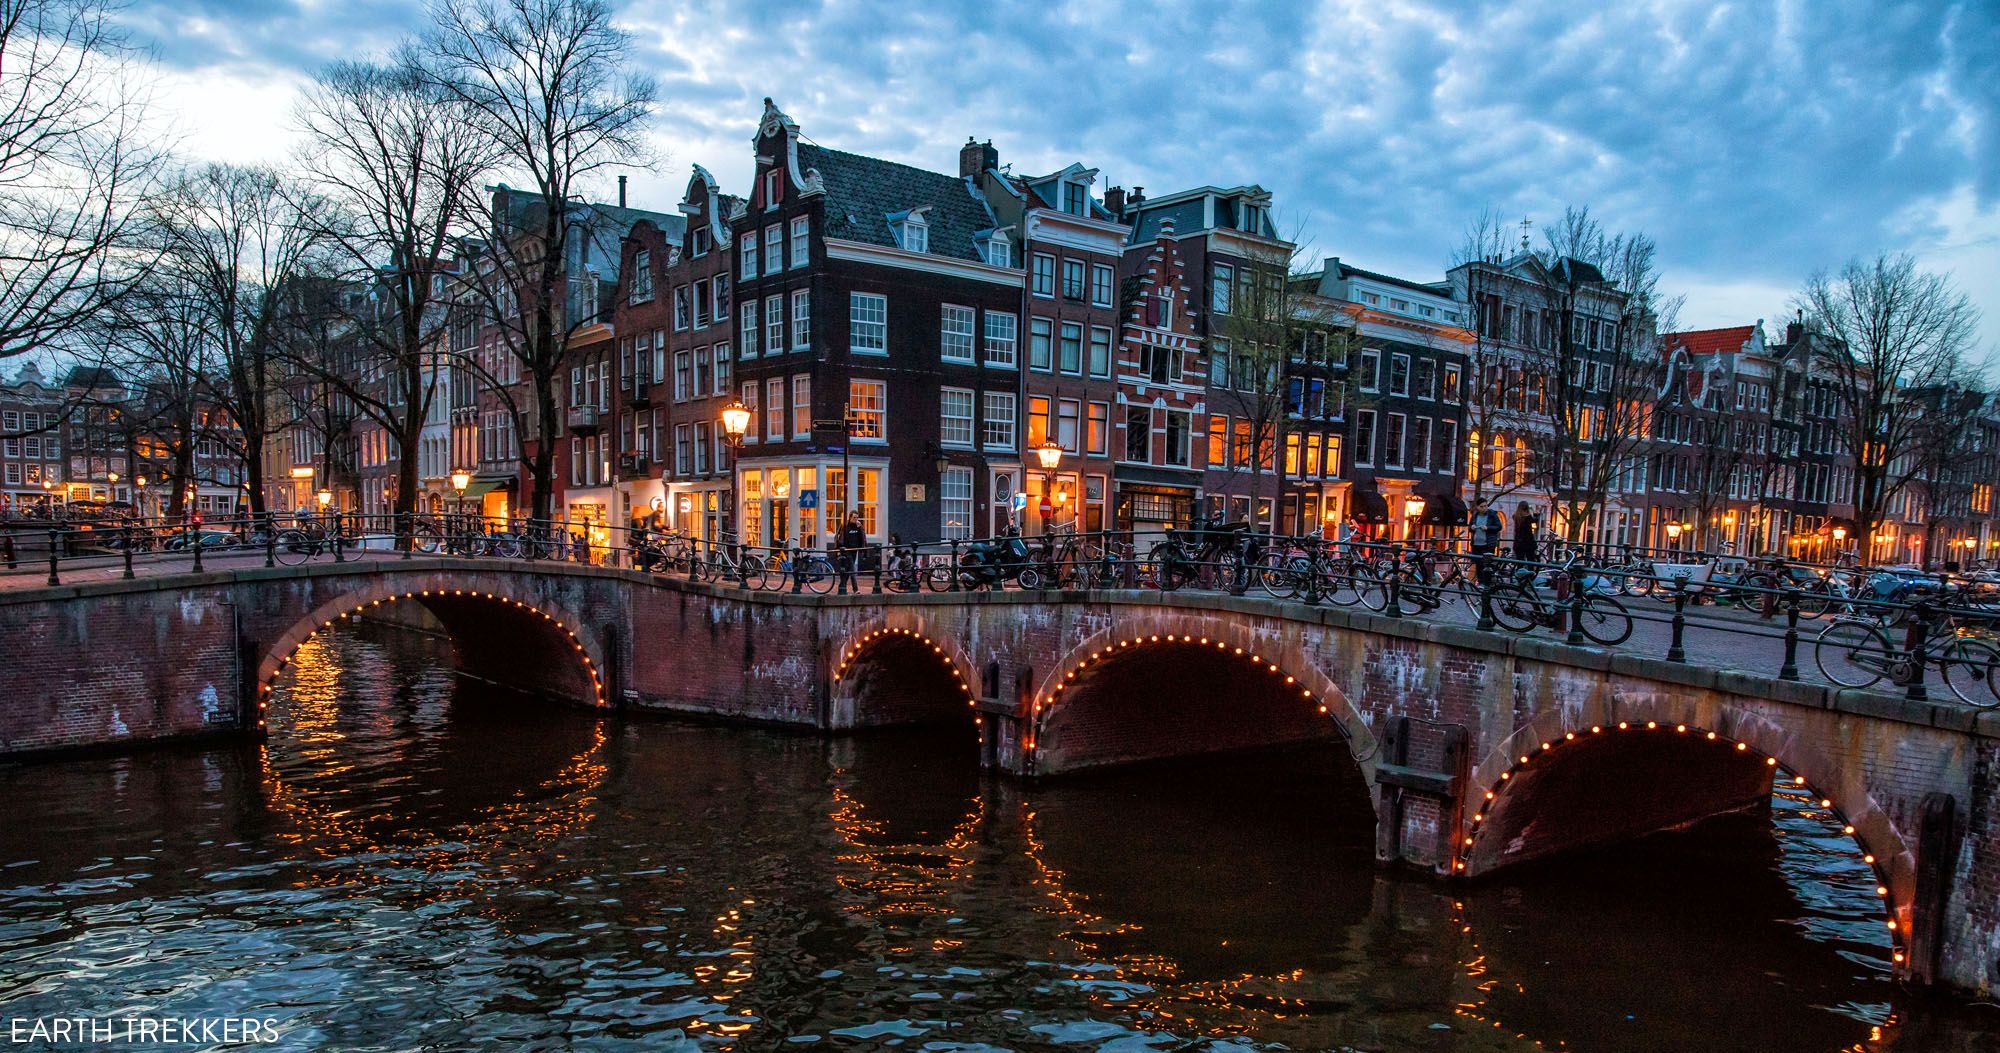 Featured image for “Where to Stay in Amsterdam: Best Hotels & Neighborhoods”